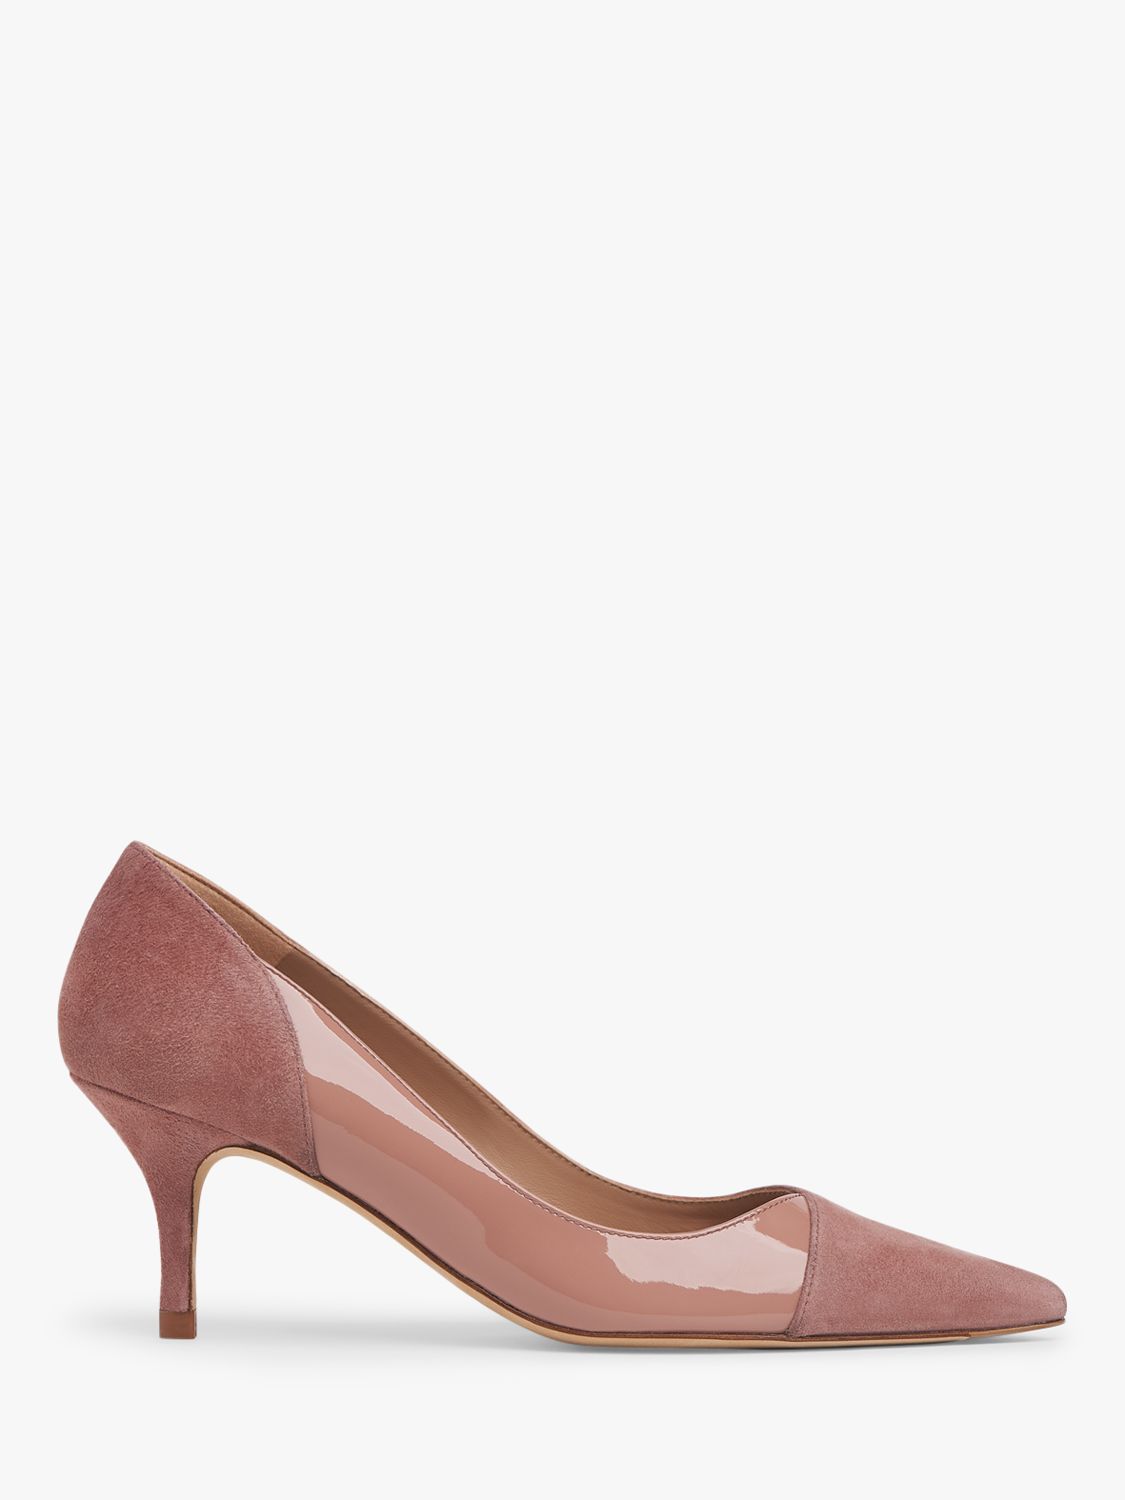 pink suede court shoes uk